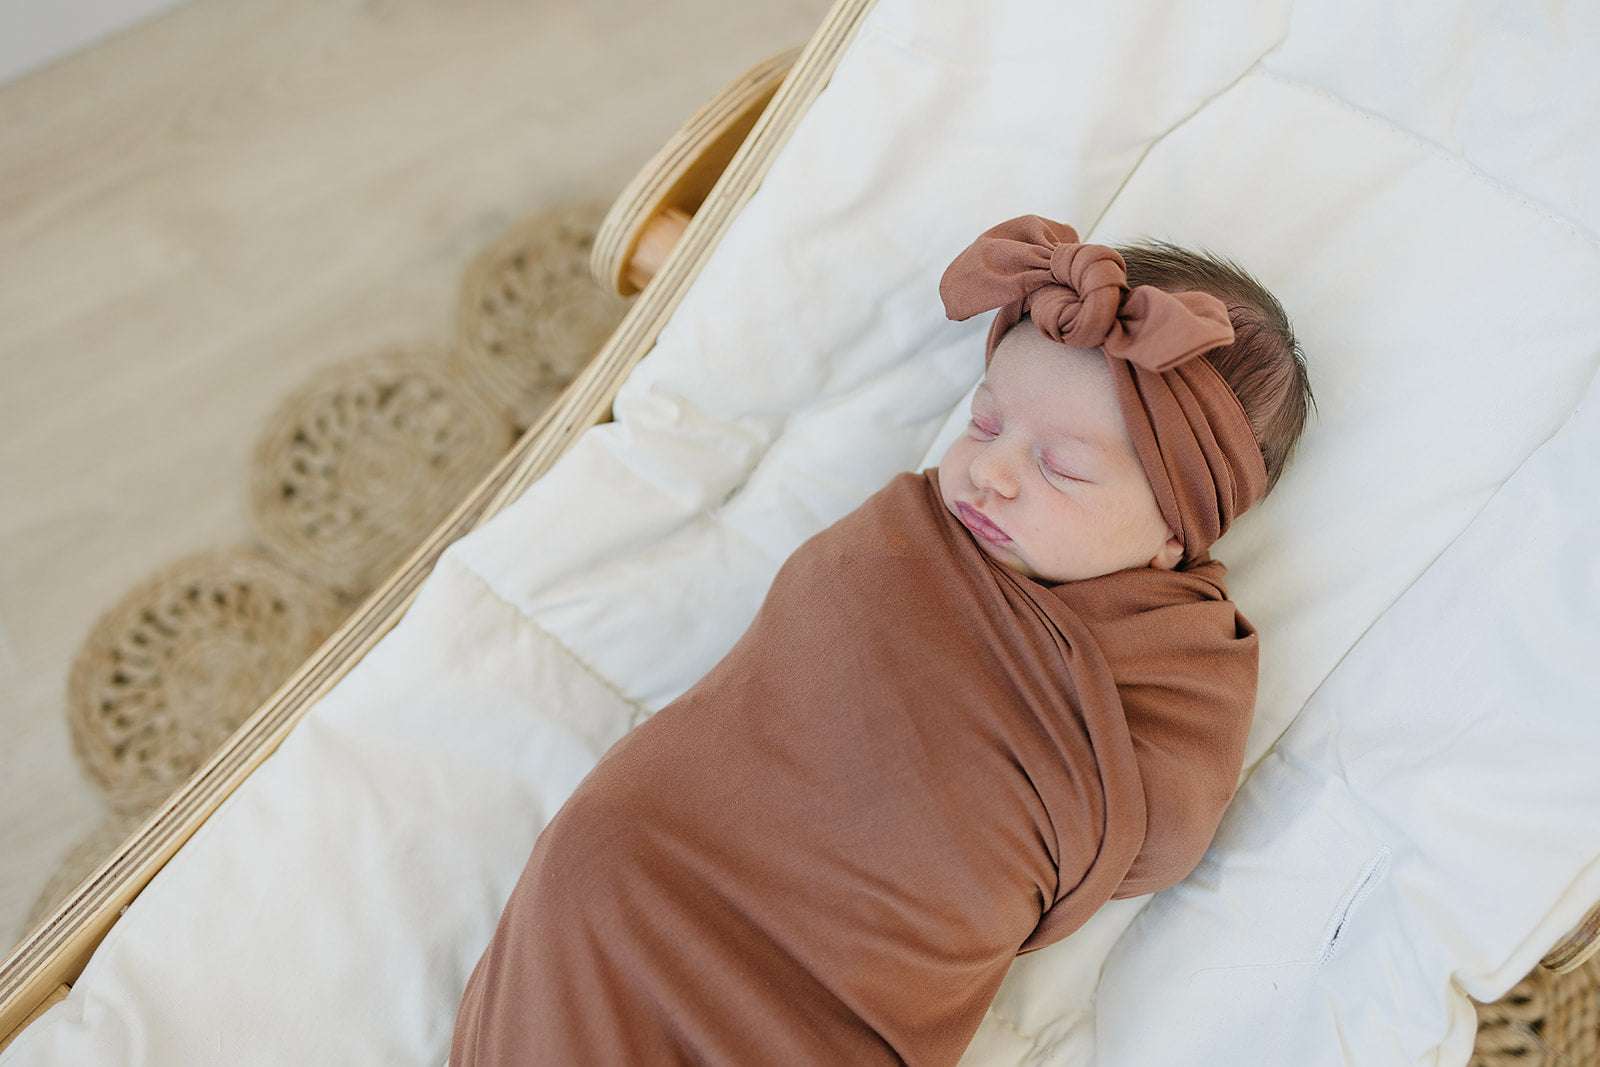 Rust Bamboo Swaddle Hat OR Head Wrap Set Milk & Baby